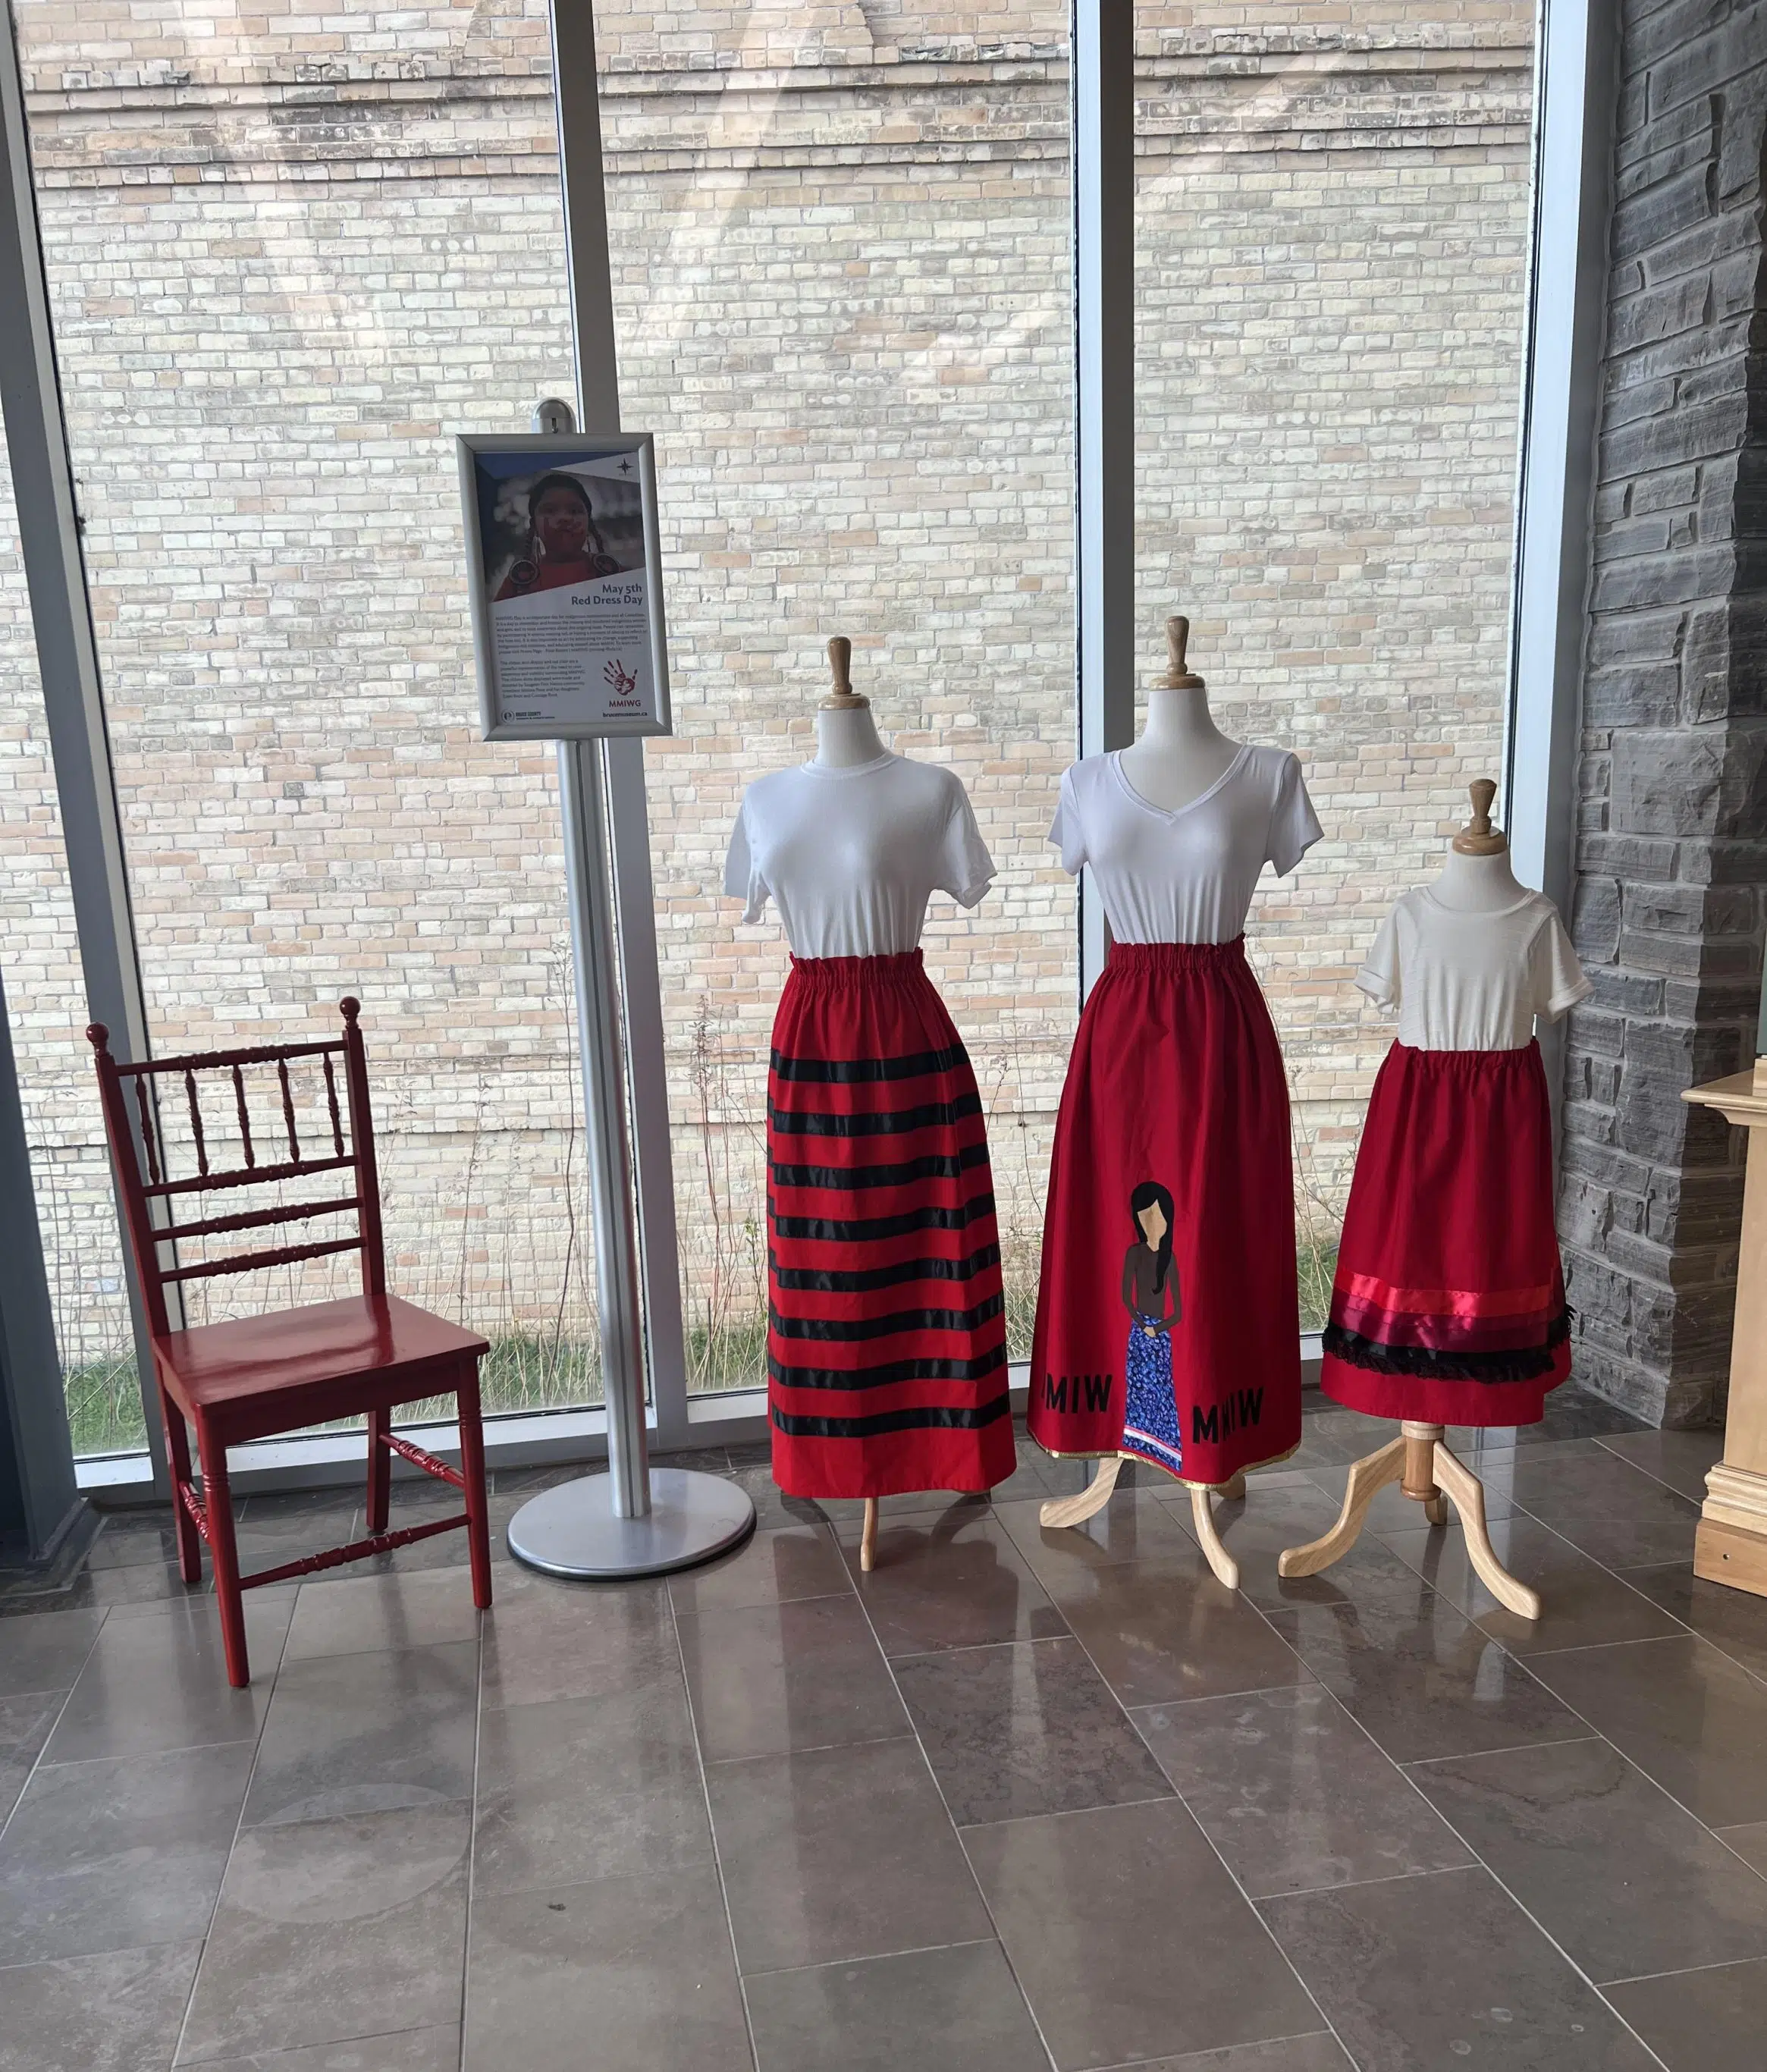 Bruce County Museum Displays Skirts To Raise Awareness For Missing & Murdered Indigenous Women